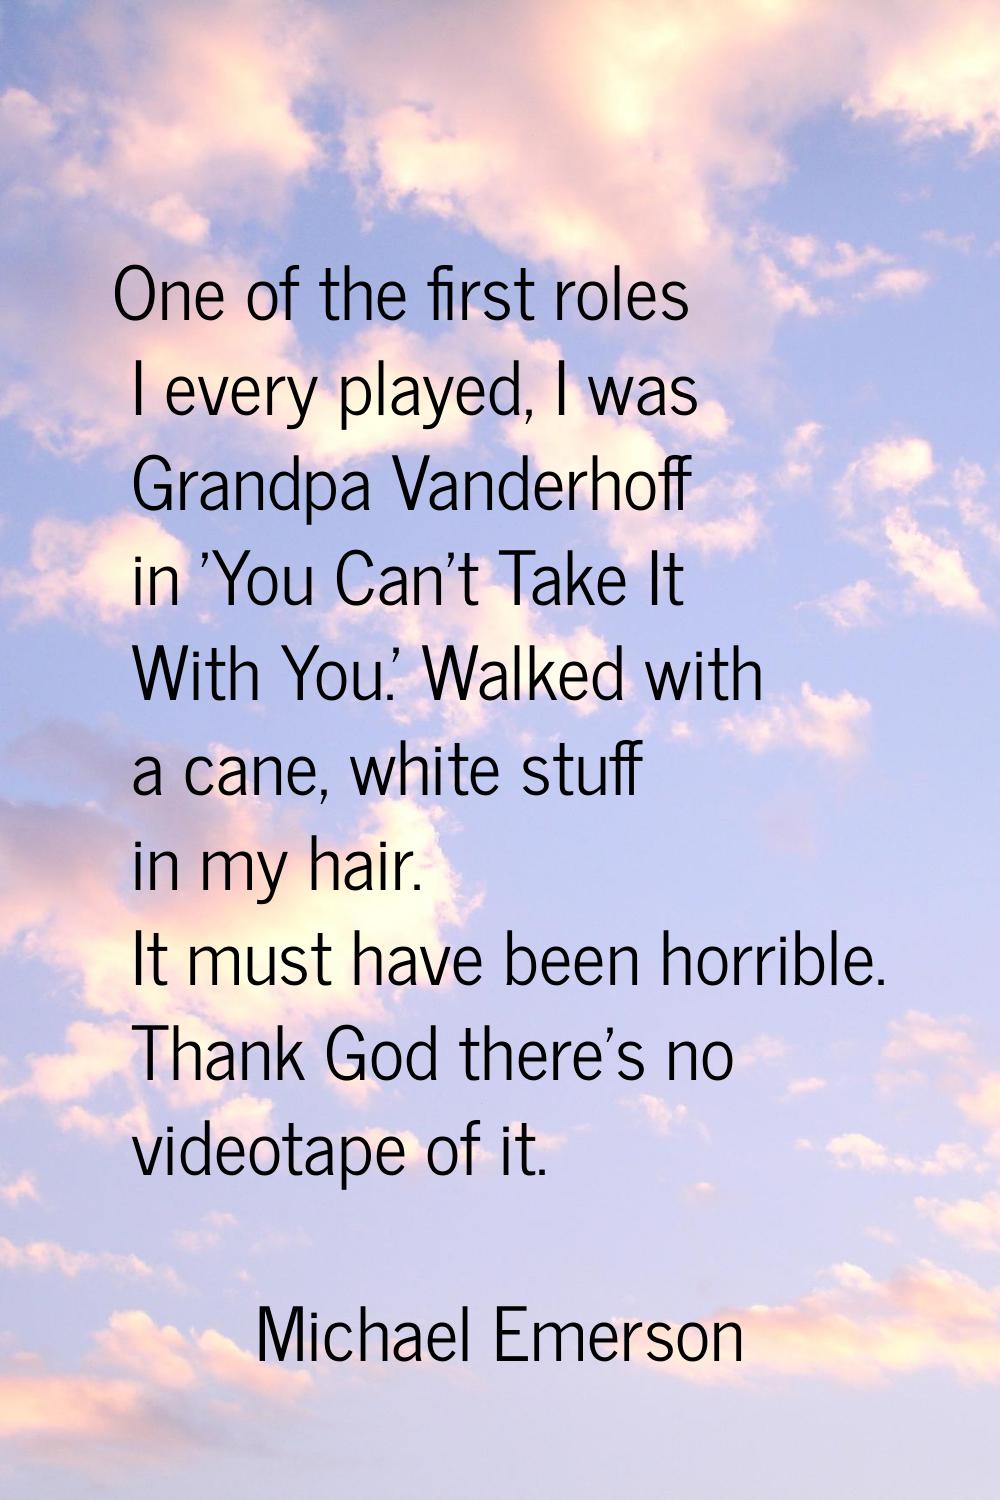 One of the first roles I every played, I was Grandpa Vanderhoff in 'You Can't Take It With You.' Wa